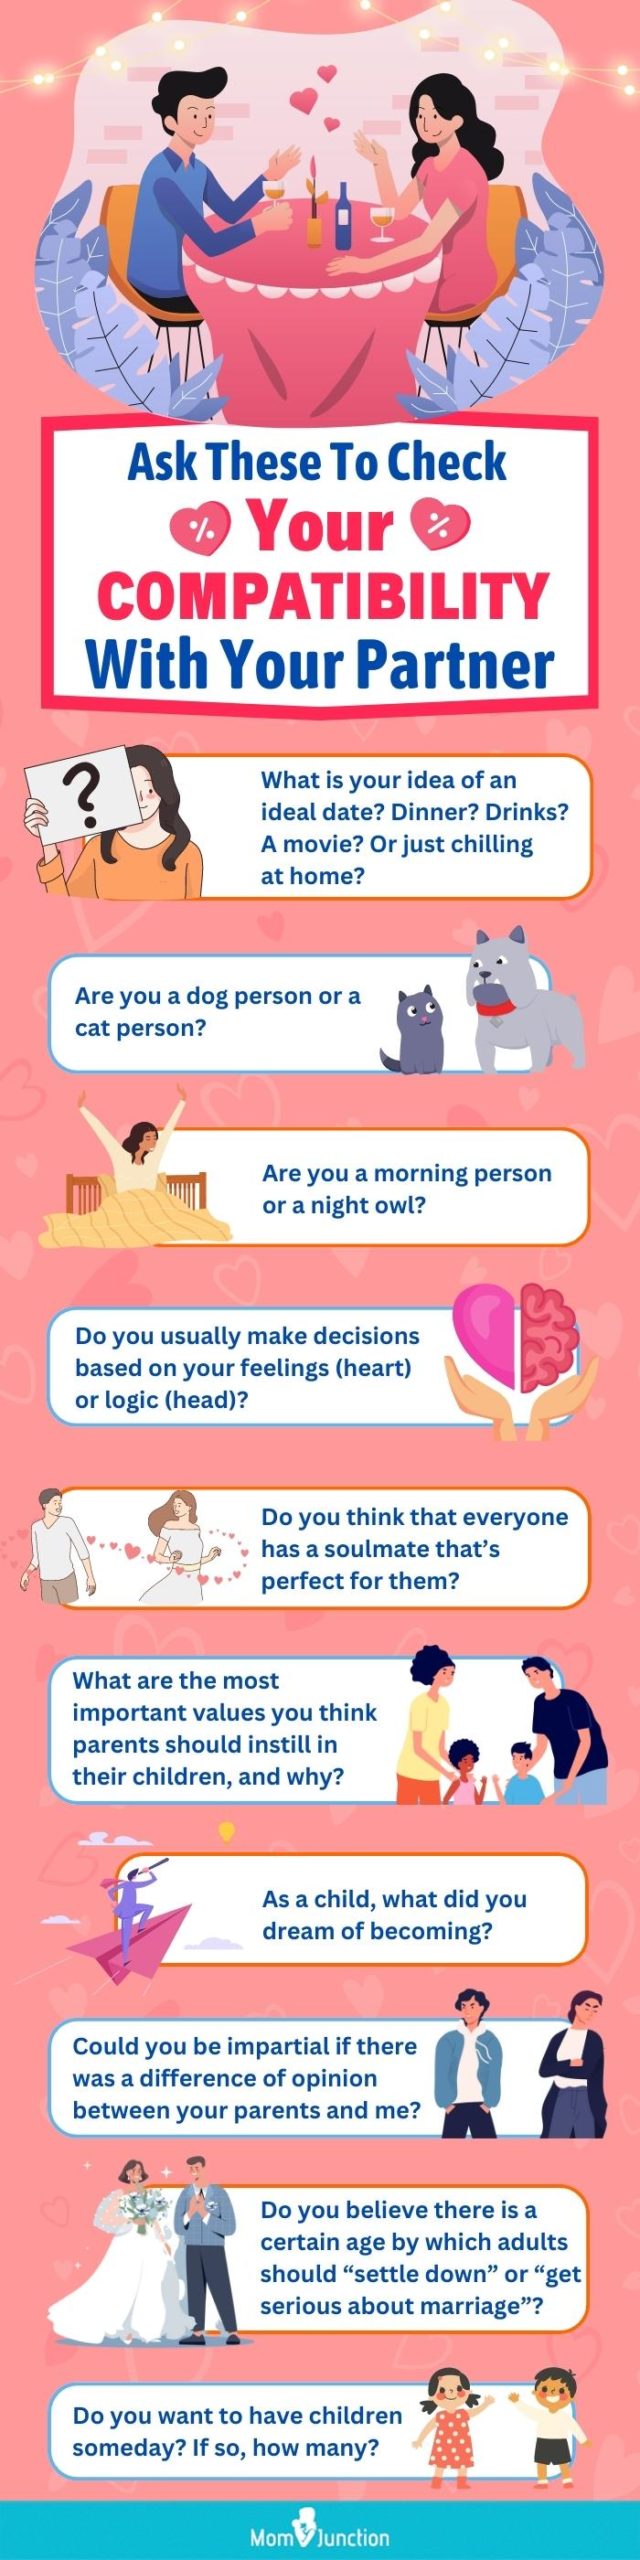 ask these to check your compatibility with your partner [infographic]